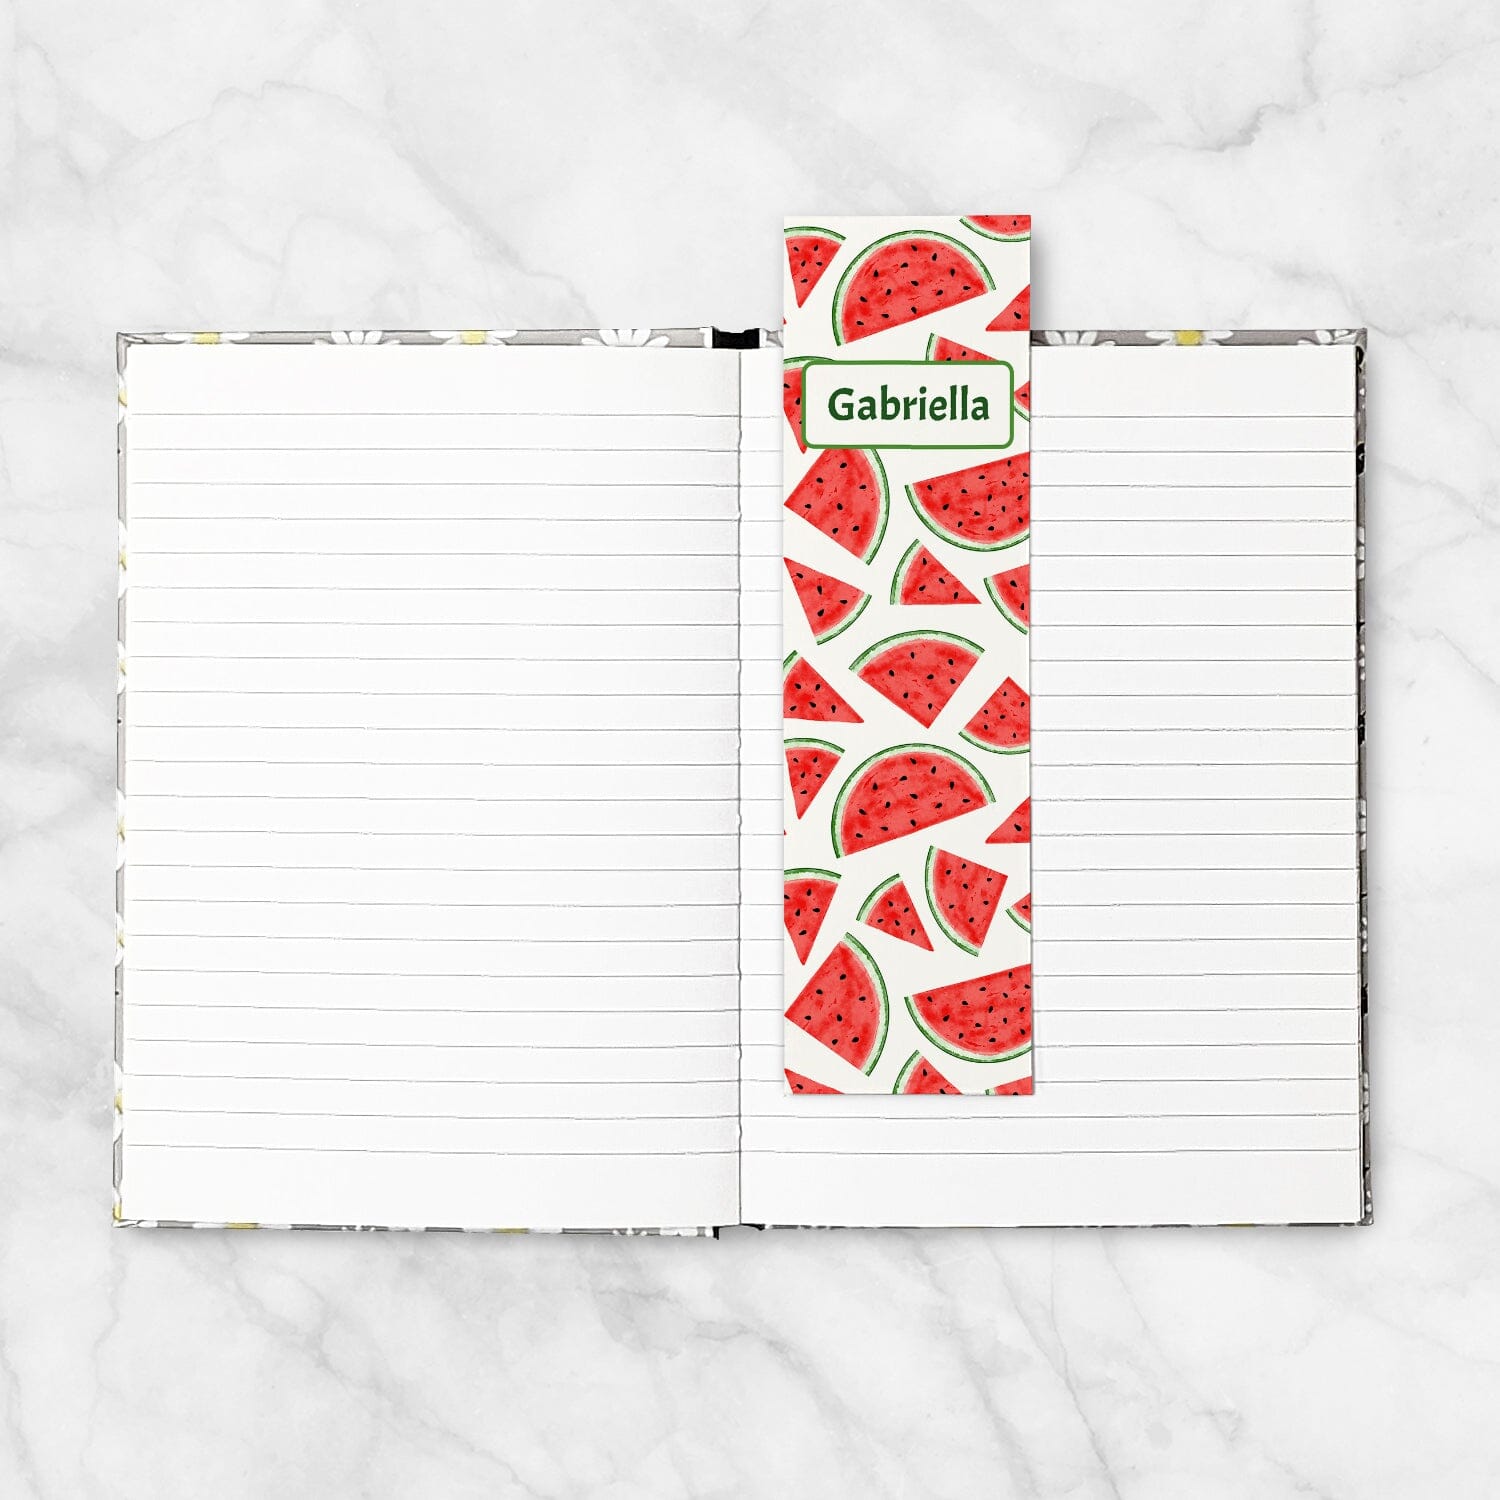 Printable Personalized Watermelon Slices Bookmarks at Printable Planning. Example bookmark in a hardcover notebook.